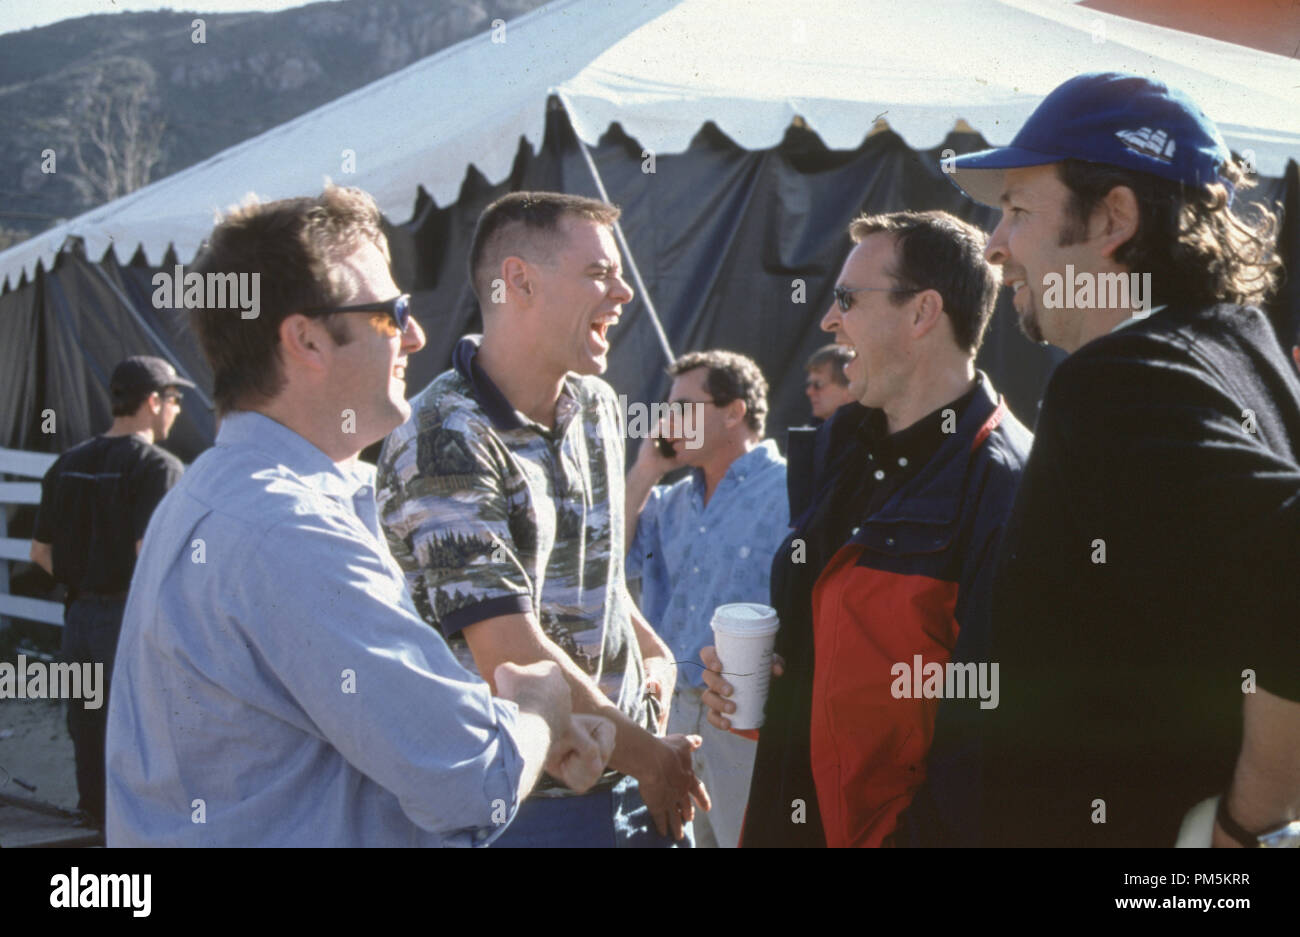 Film Still / Publicity Stills from 'Me, Myself and Irene'  Producer Bradley Thomas, Jim Carrey, and director's Bobby and Peter Farrelly © 2000 20th Century Fox Photo Credit: Melinda Sue Gordon File Reference # 30846375THA  For Editorial Use Only -  All Rights Reserved Stock Photo